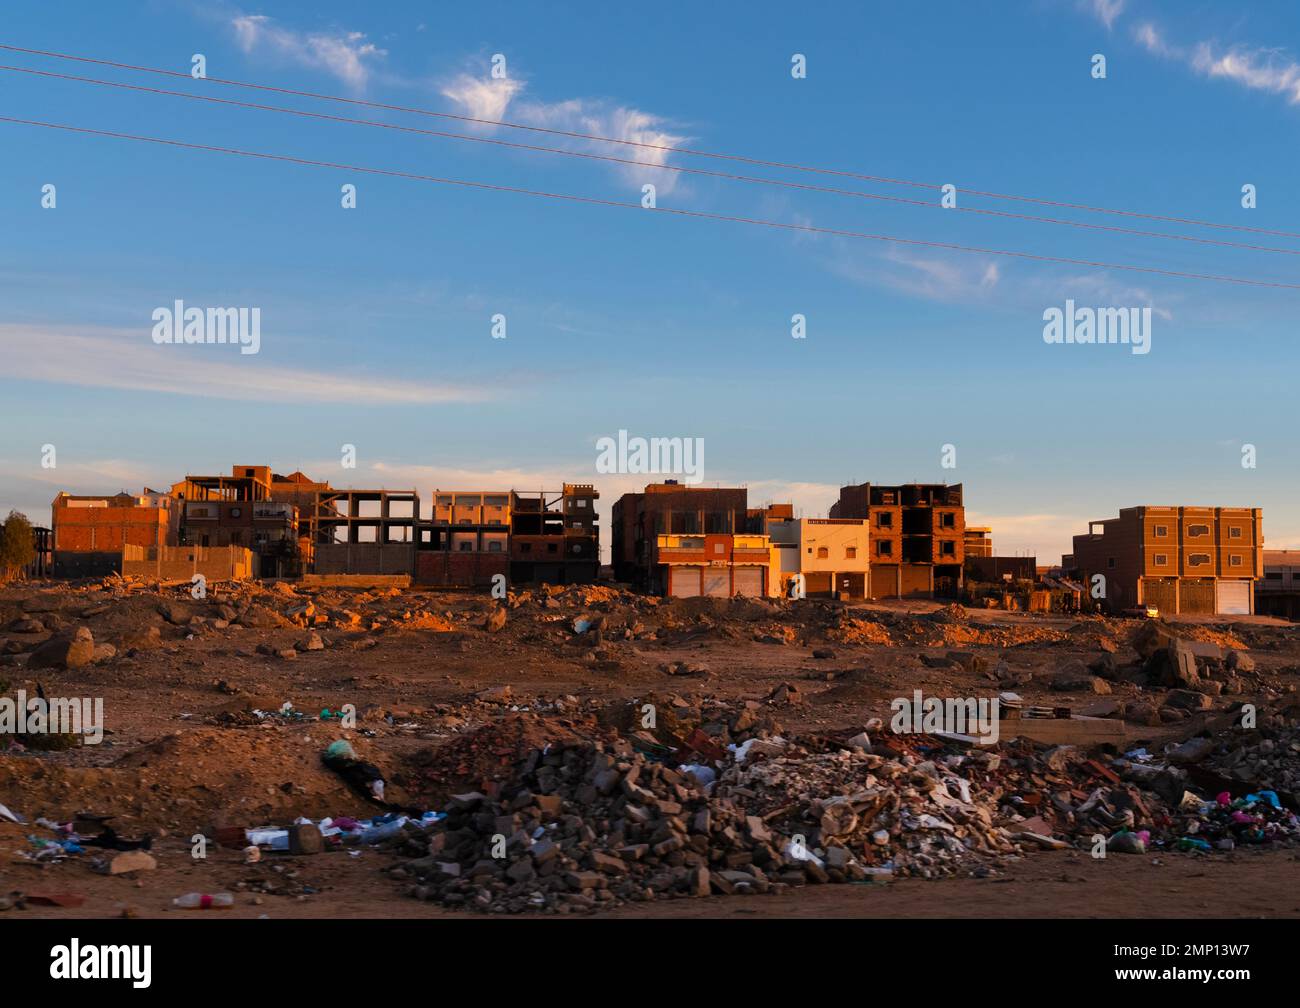 Garbages in front of new houses, North Africa, Tamanrasset, Algeria Stock Photo